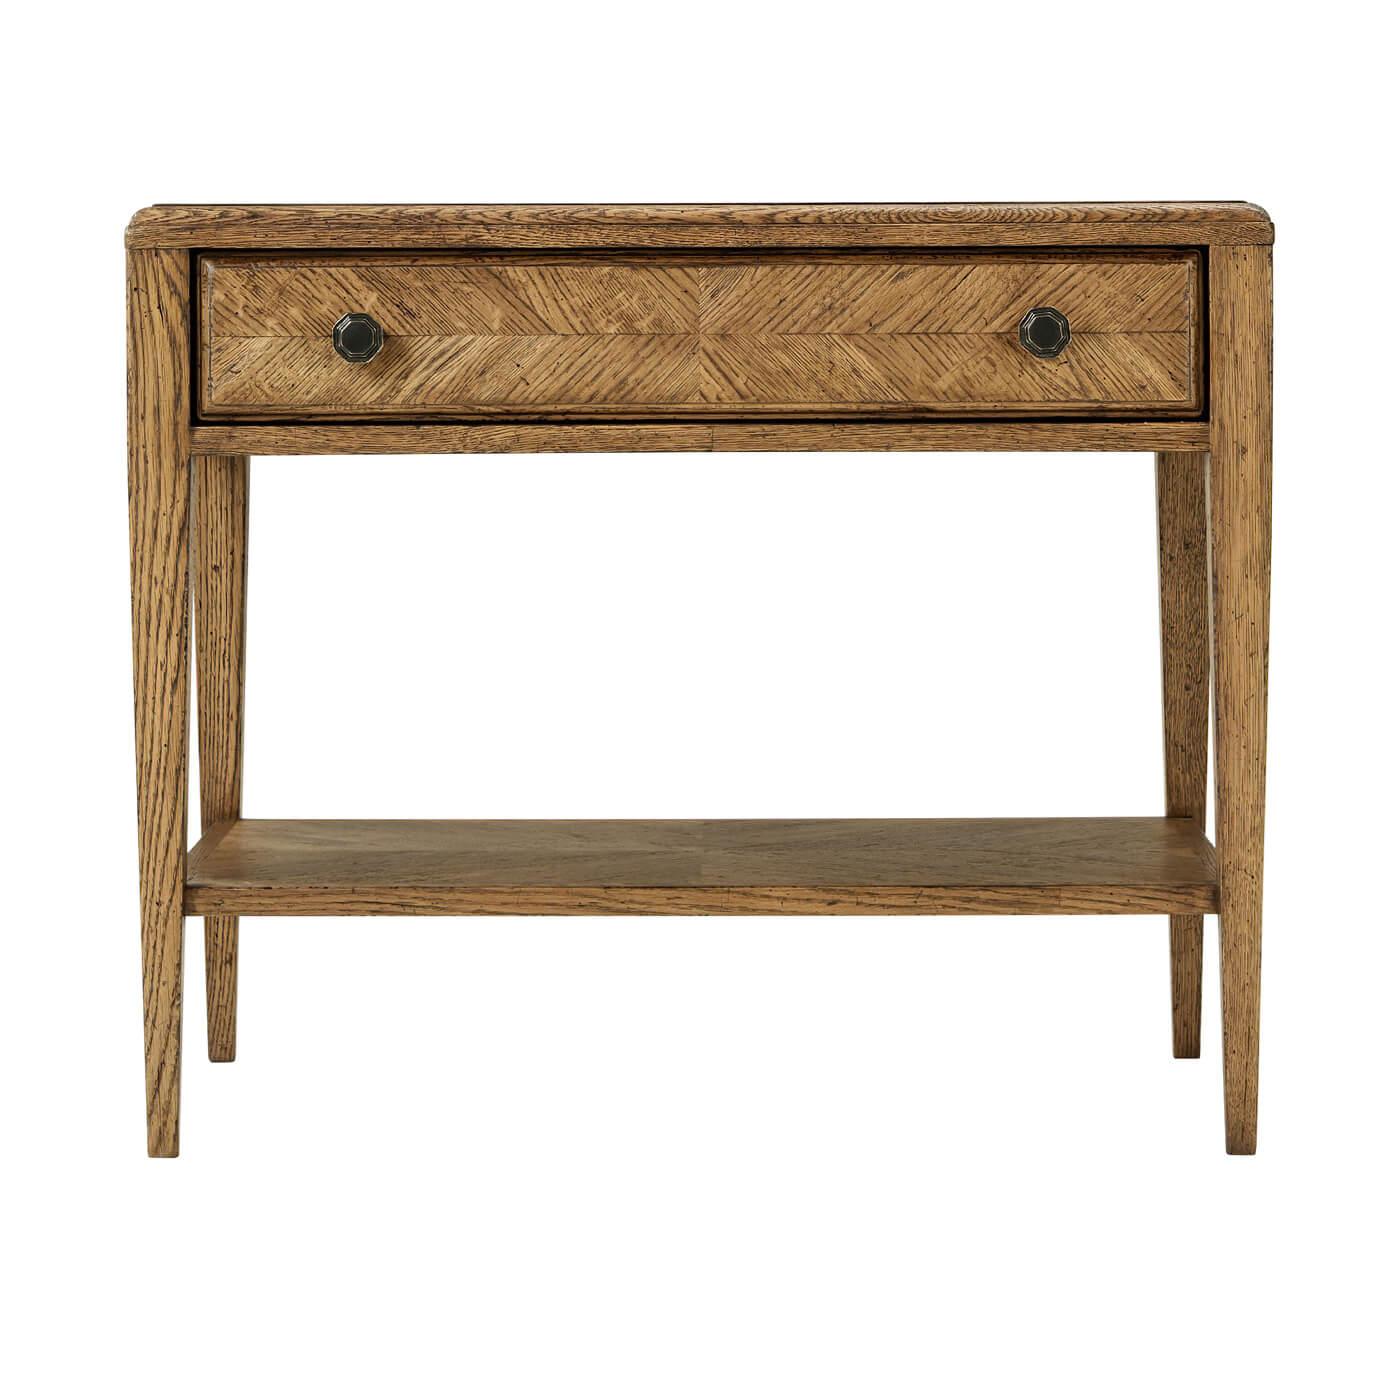 A rustic oak end table with oak parquetry patterned top and bottom tier, highlighted by our Dawn finish and joined with a rustic tapered oak leg.
Shown in Dawn Finish
Dimensions
29